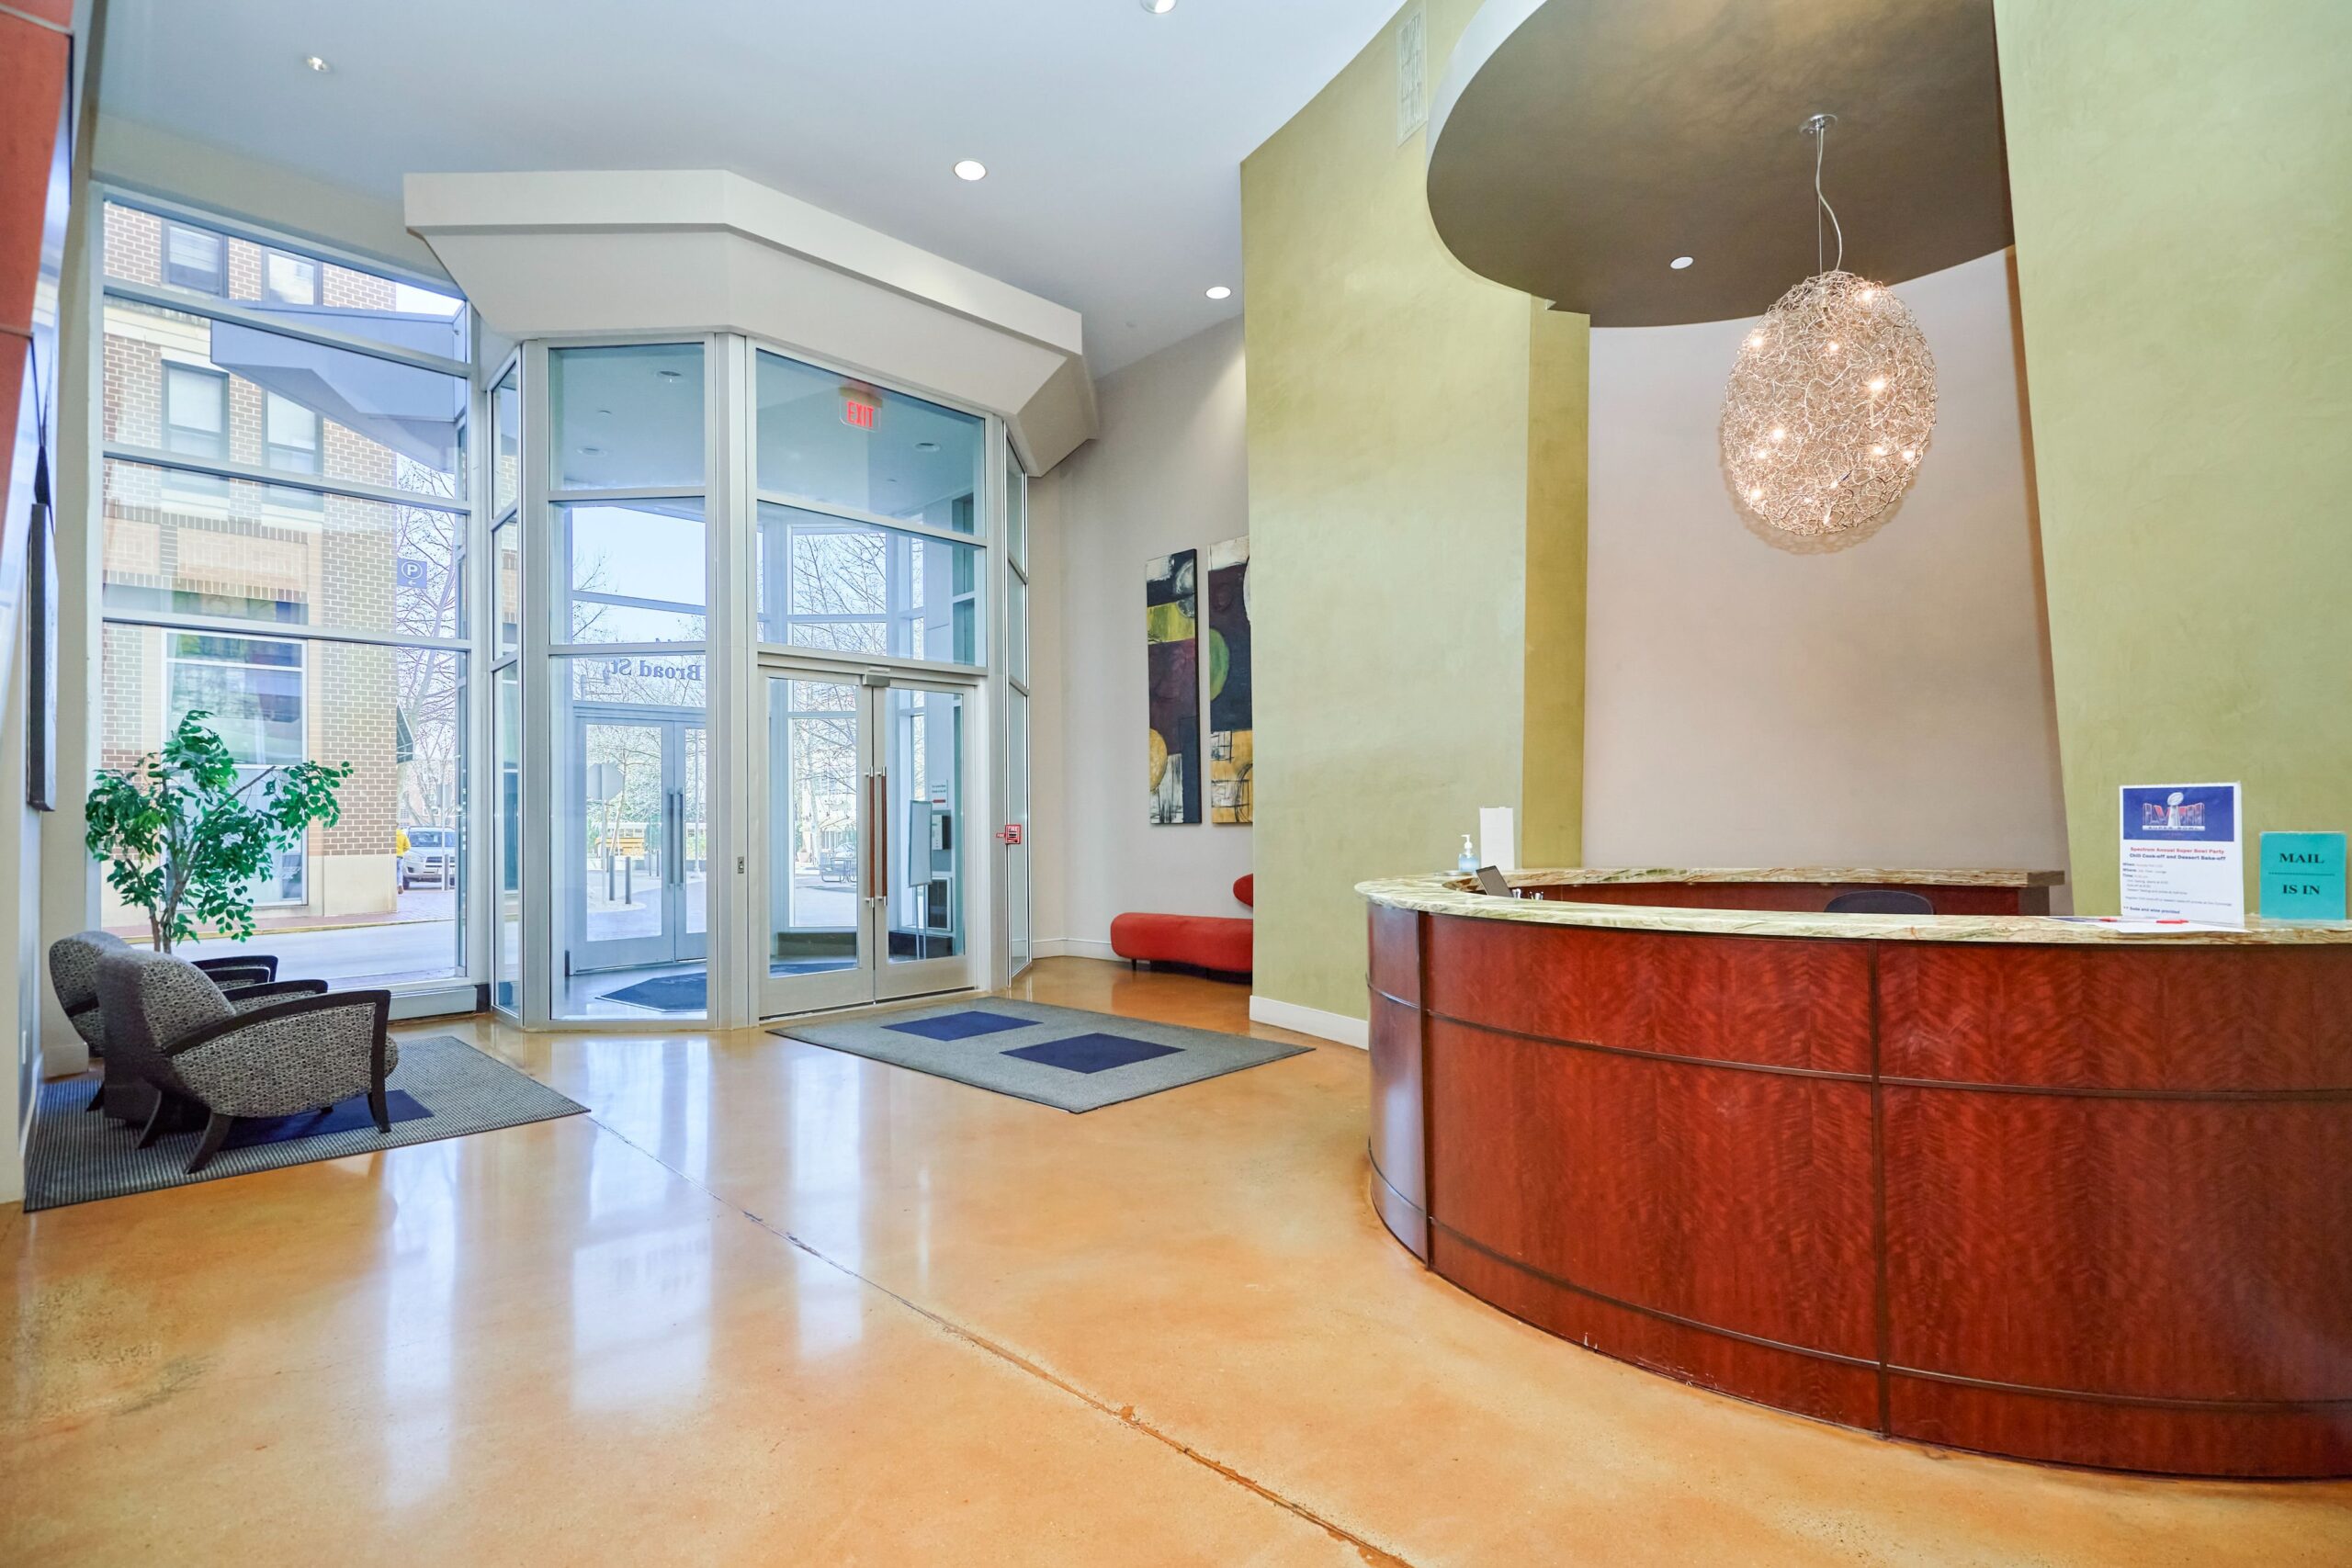 Professional interior photo of 444 W Broad St Unit 631 - showing the concierge desk at the building front entrance